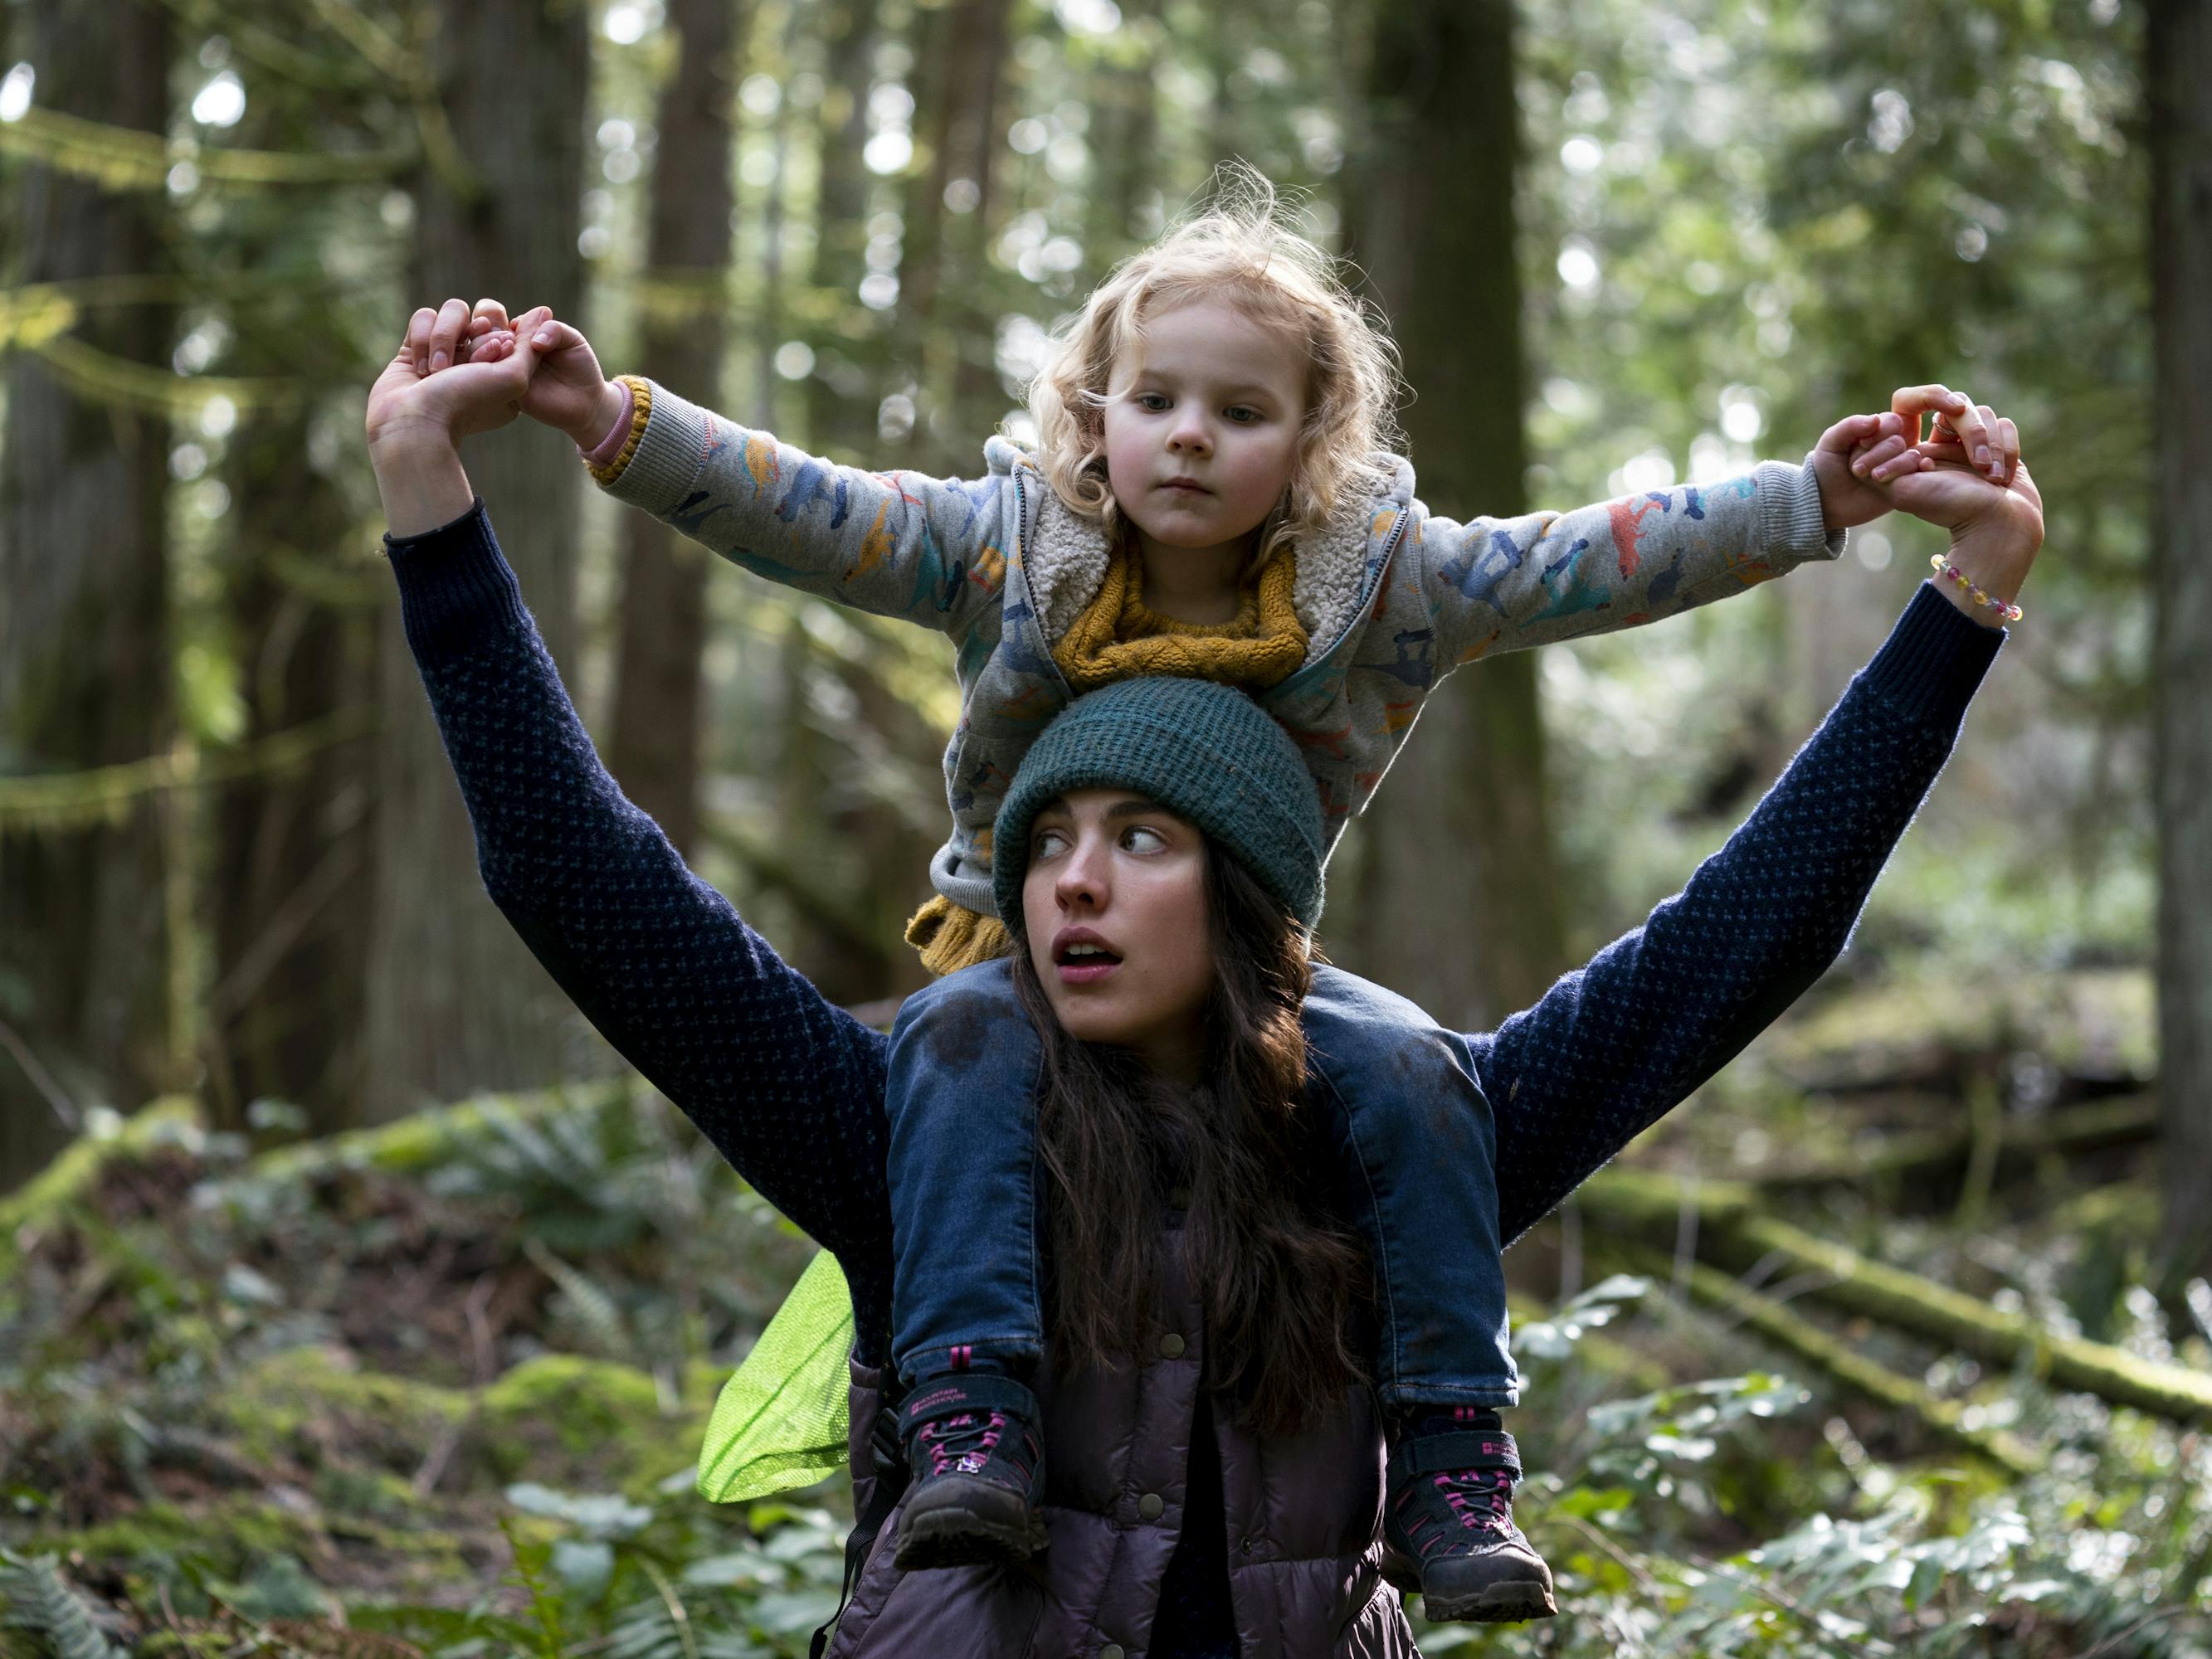 Maddy (Rylea Nevaeh Whittet) and Alex Russell (Margaret Qualley) are going on a bear hunt! Maddy sits on her moms shoulders, and sunlight peeks through the green trees.